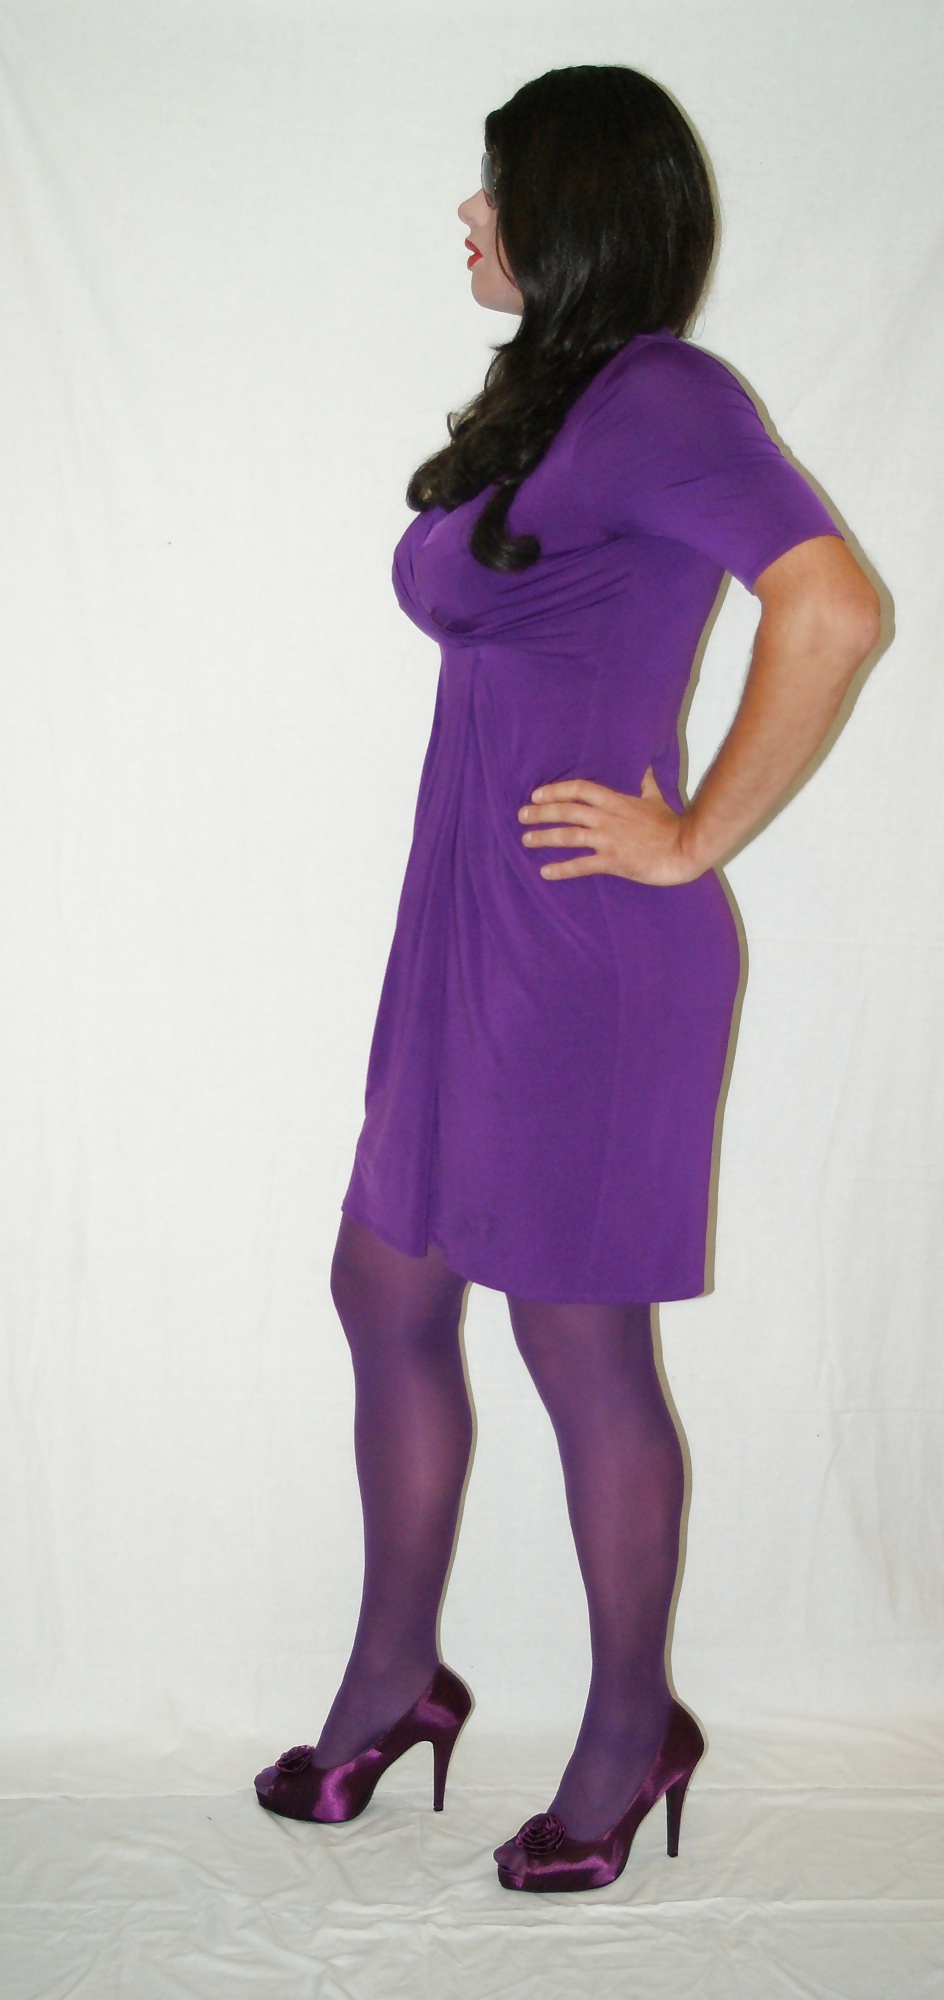 Violet Dress and pantyhose #41059987